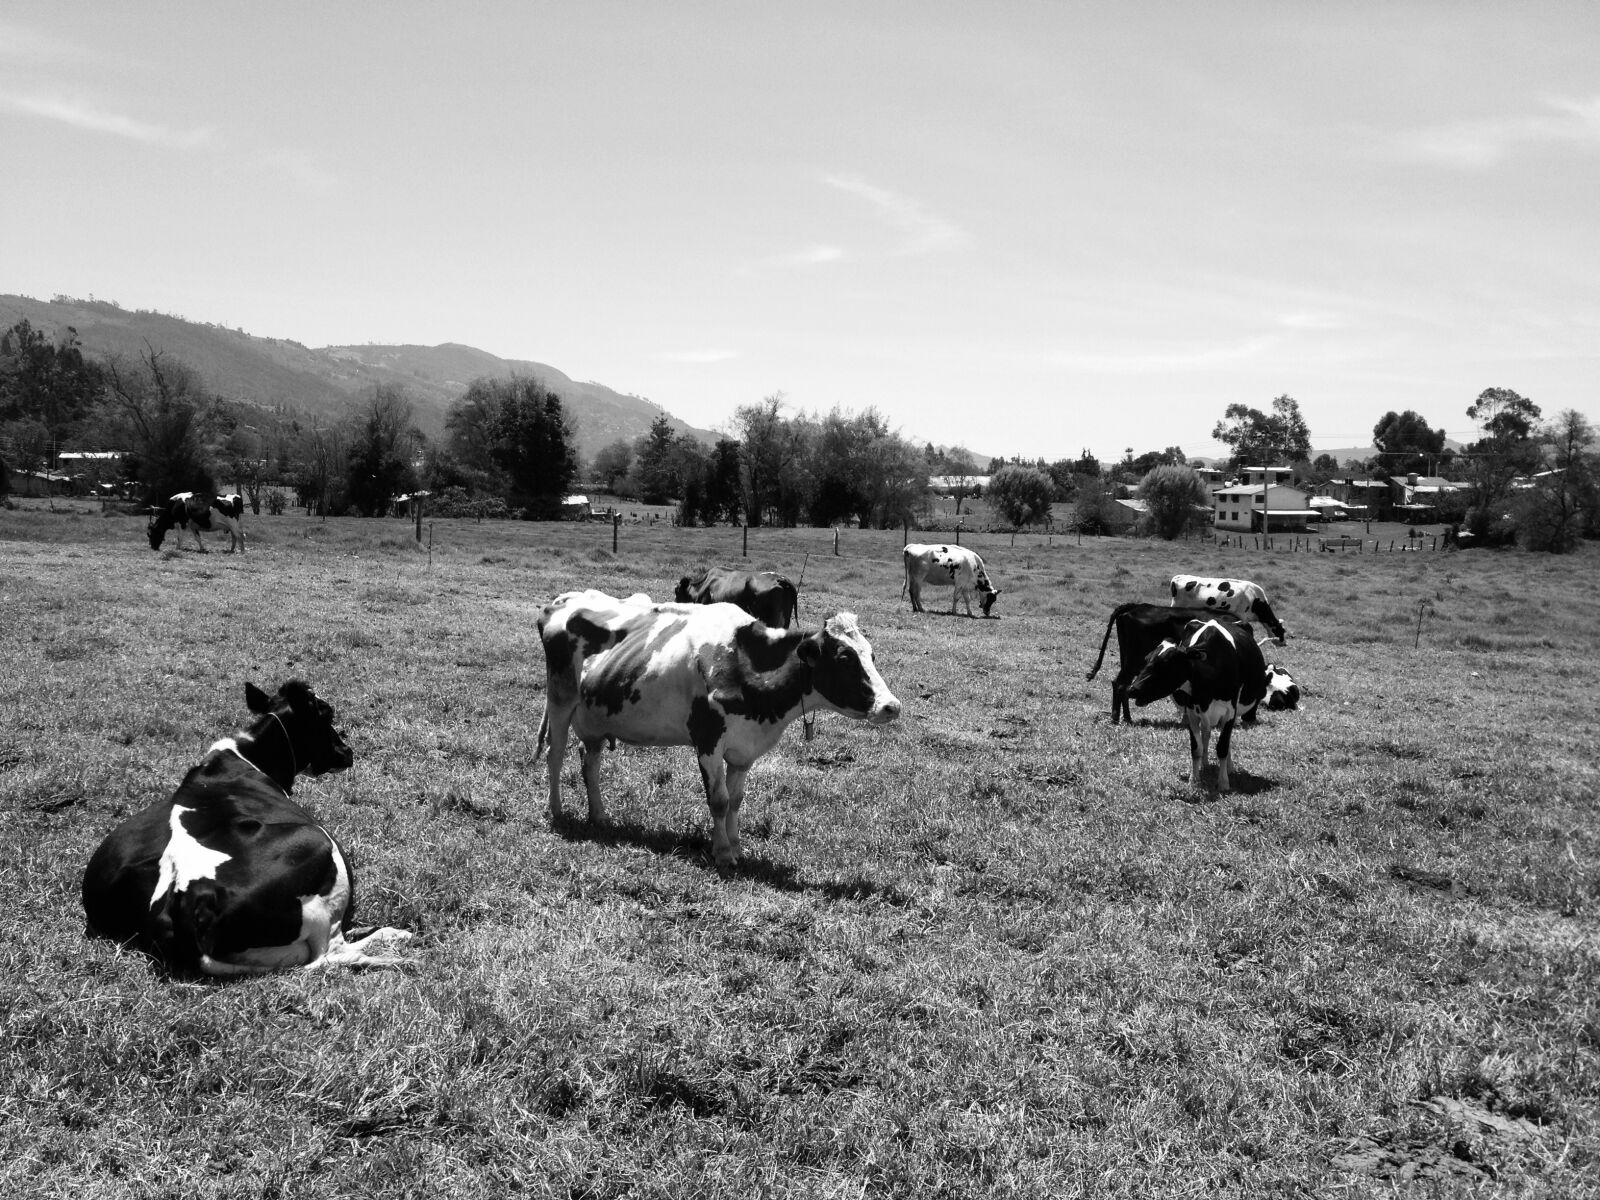 Apple iPhone 4S sample photo. Cows, portrait, rural photography